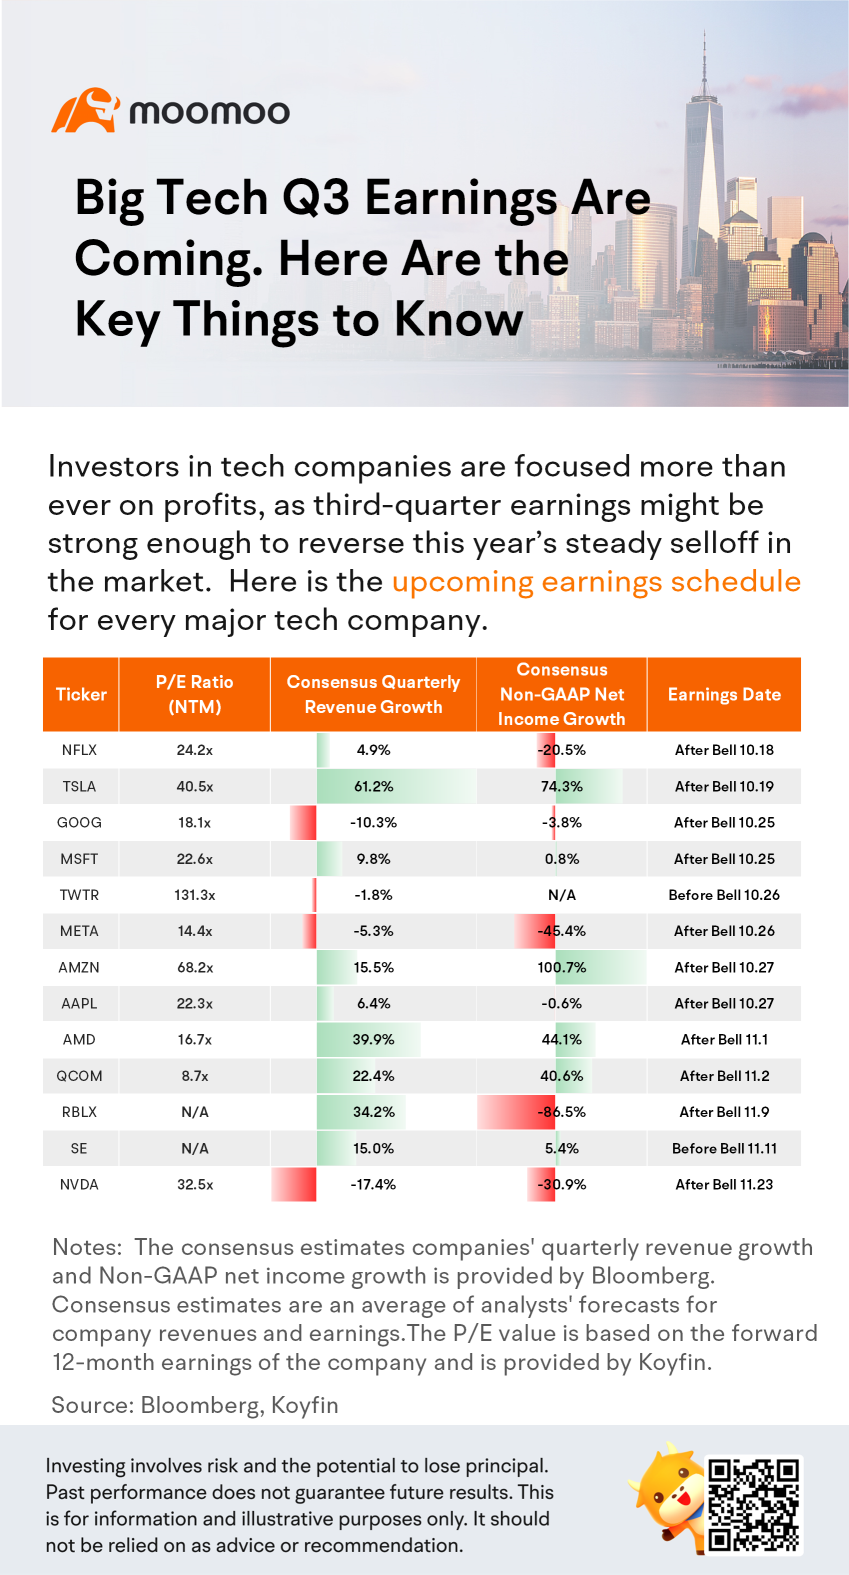 Big Tech Q3 Earnings Are Coming. Here Are the Key Things to Know